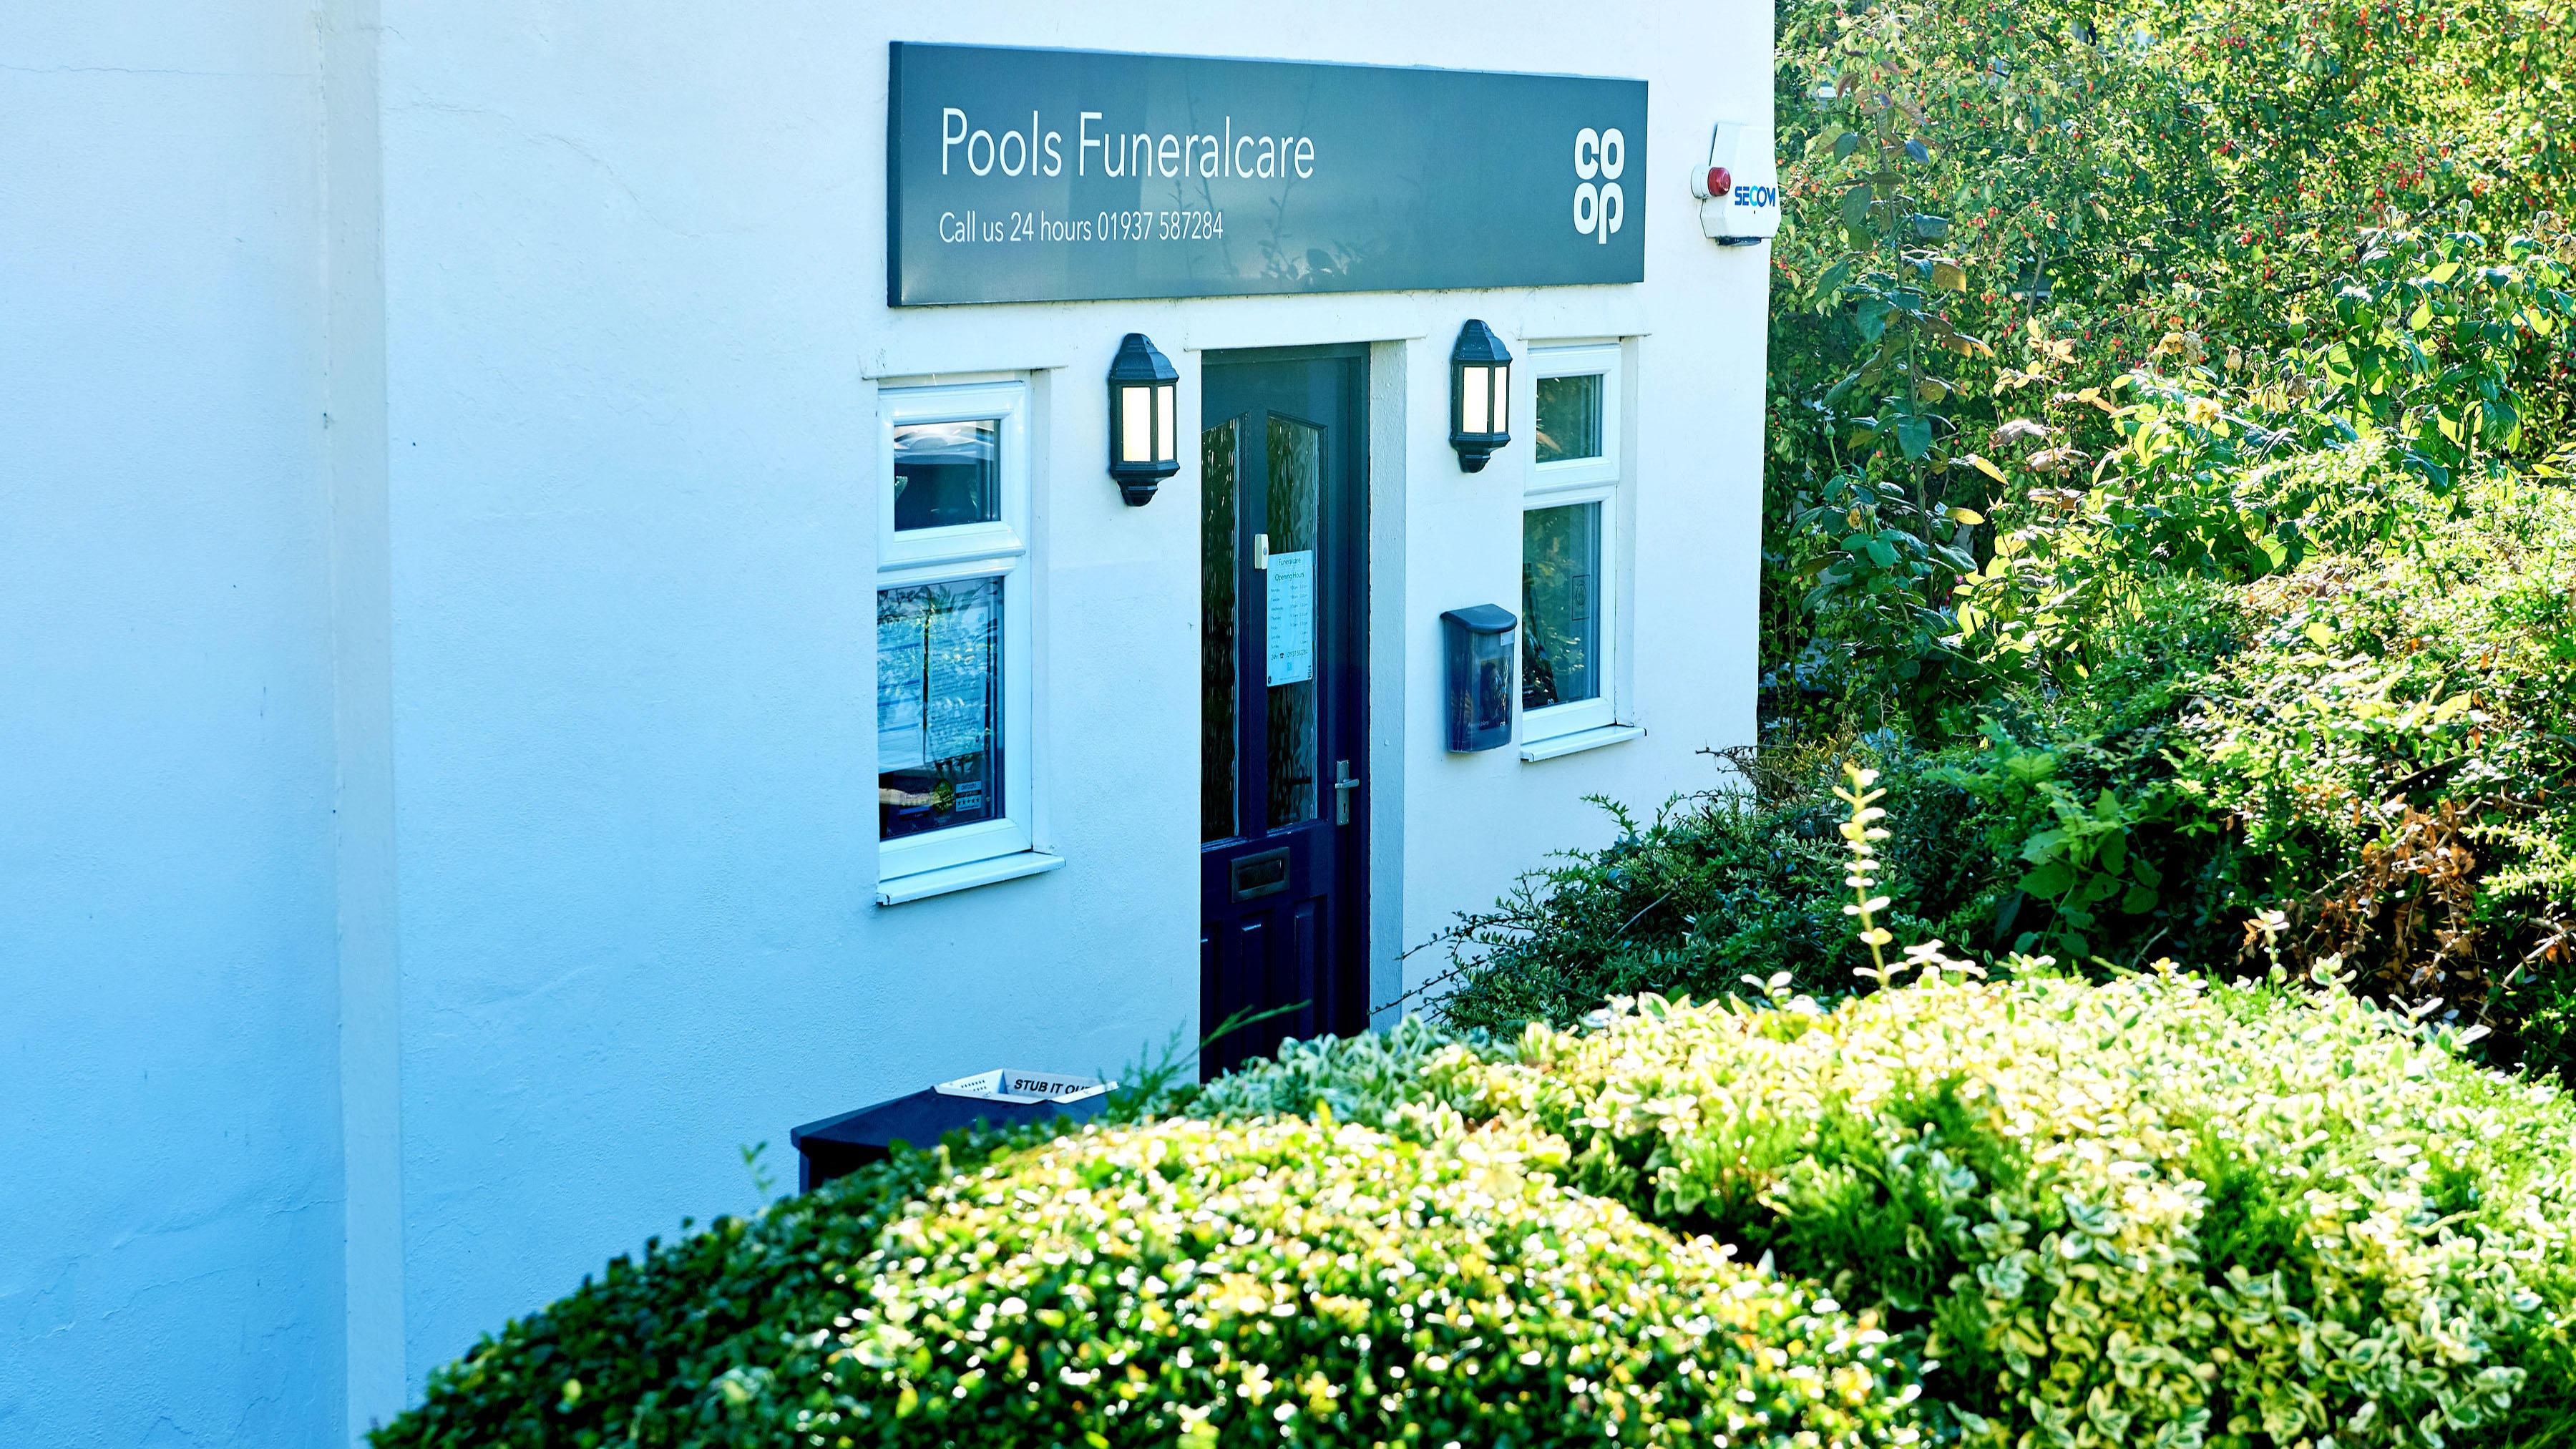 Images Pools Funeralcare